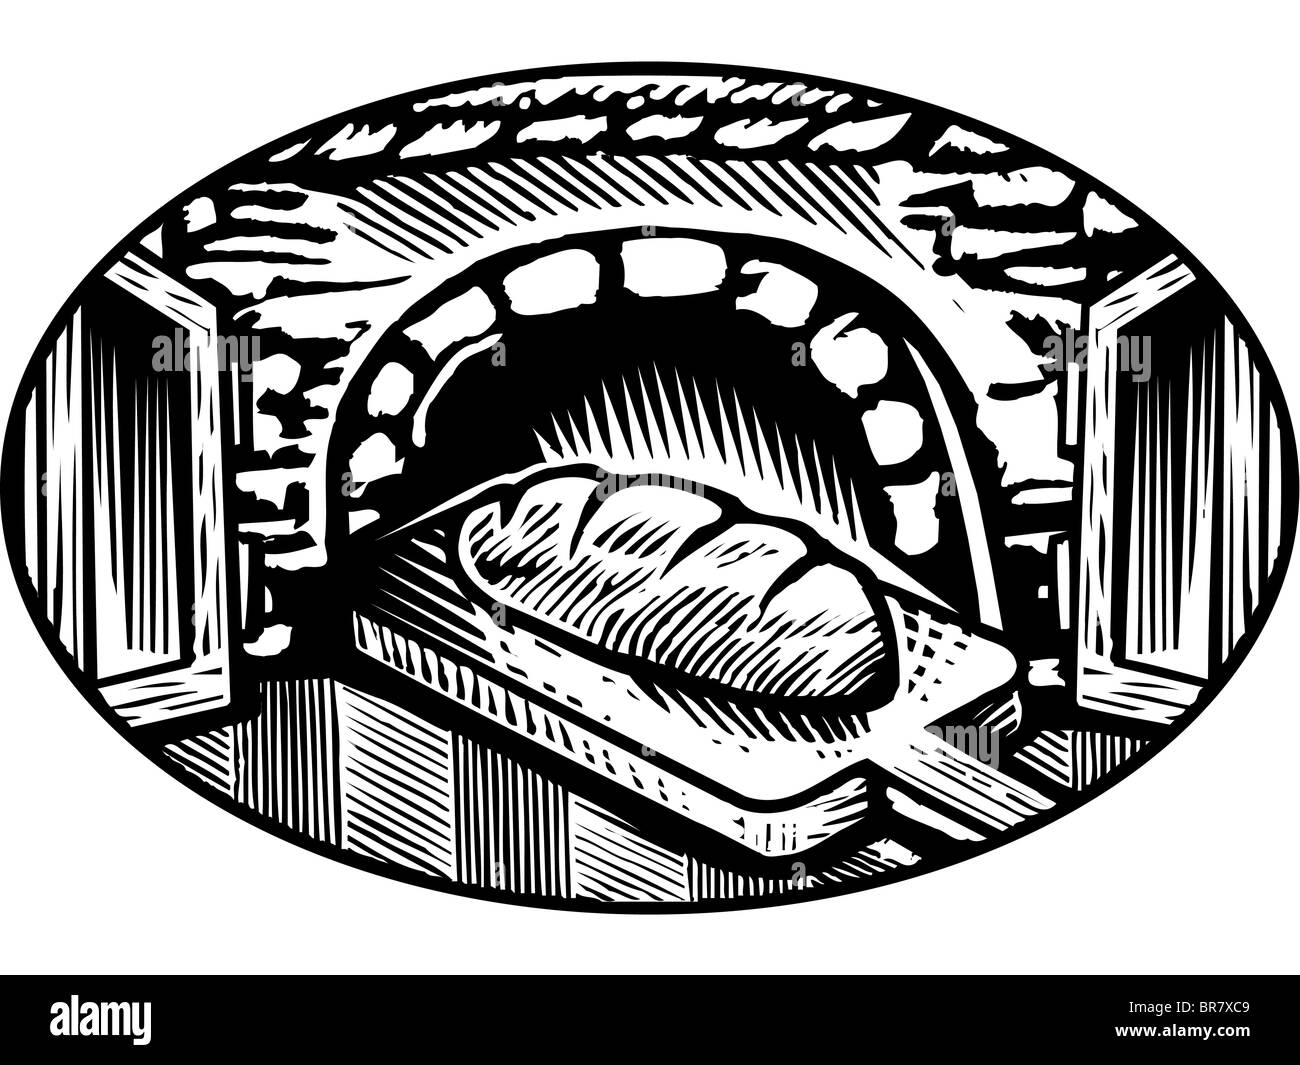 Cartoon drawing of an oven baked bread in black and white Stock Photo